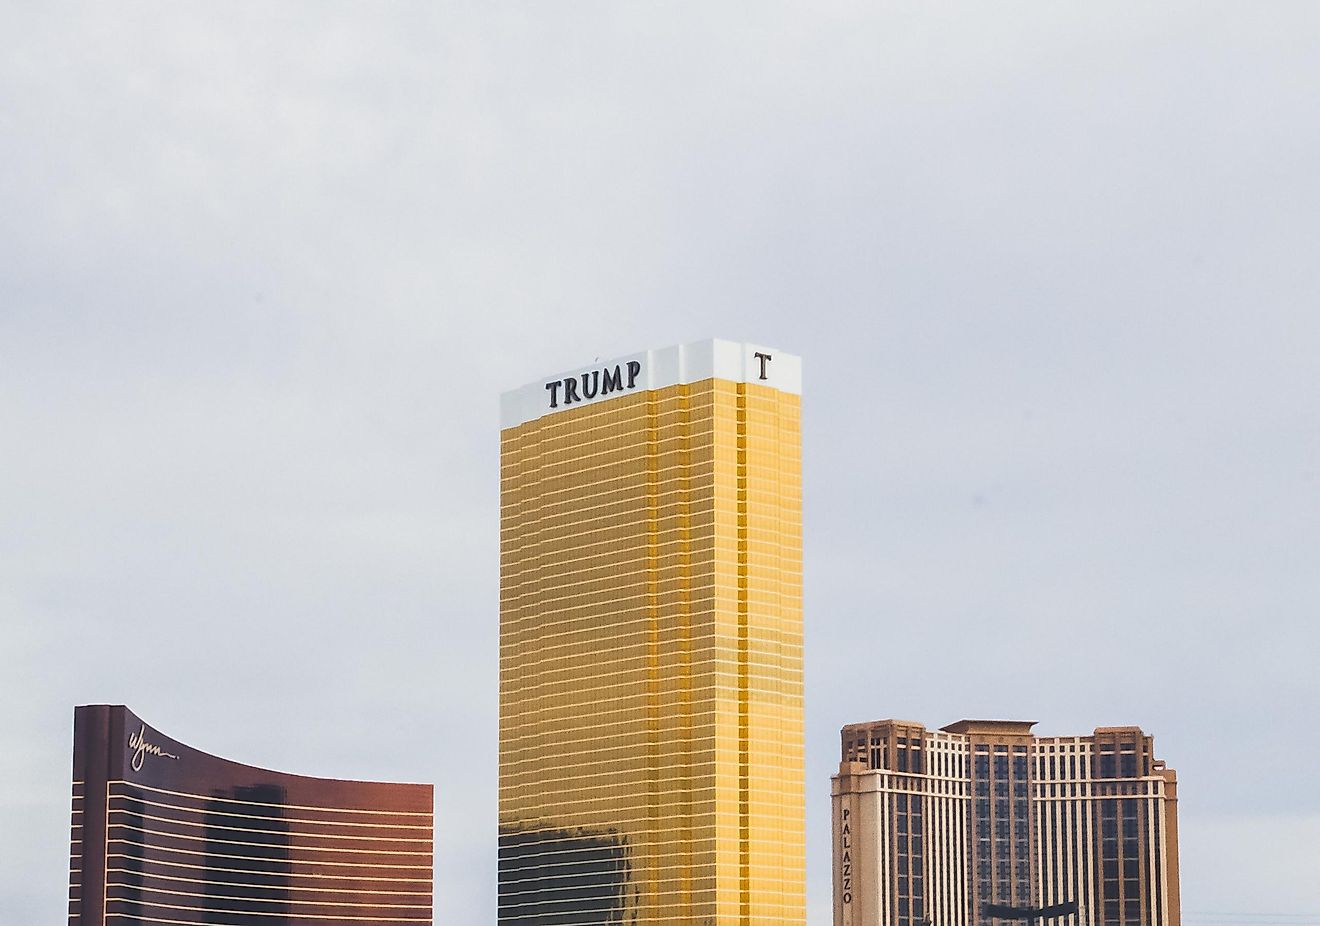 Trump made most of his fortune in real estate. Photo by NeONBRAND on Unsplash